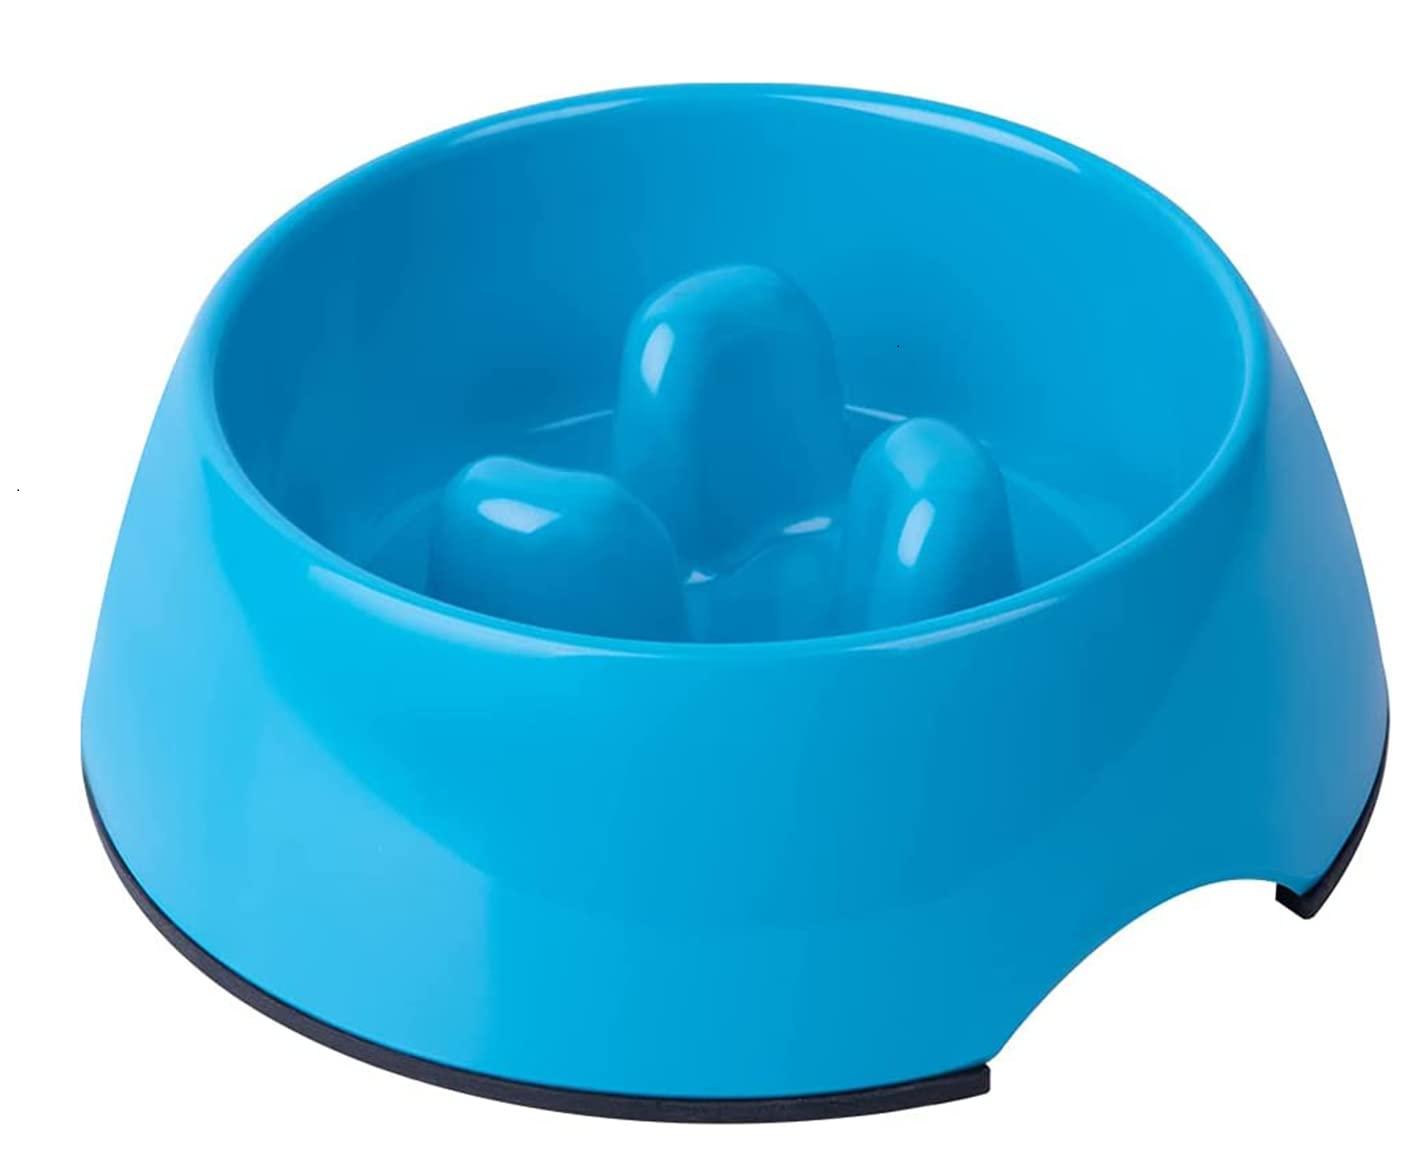 SUPER DESIGN Gobble-Stop Slow Feeder Dog Bowl Slow Eating Anti-Gulp BPA Free Melamine Bowl Fun Interactive Pet Bowl for Dogs Cats Puppies (600ml, HEART)